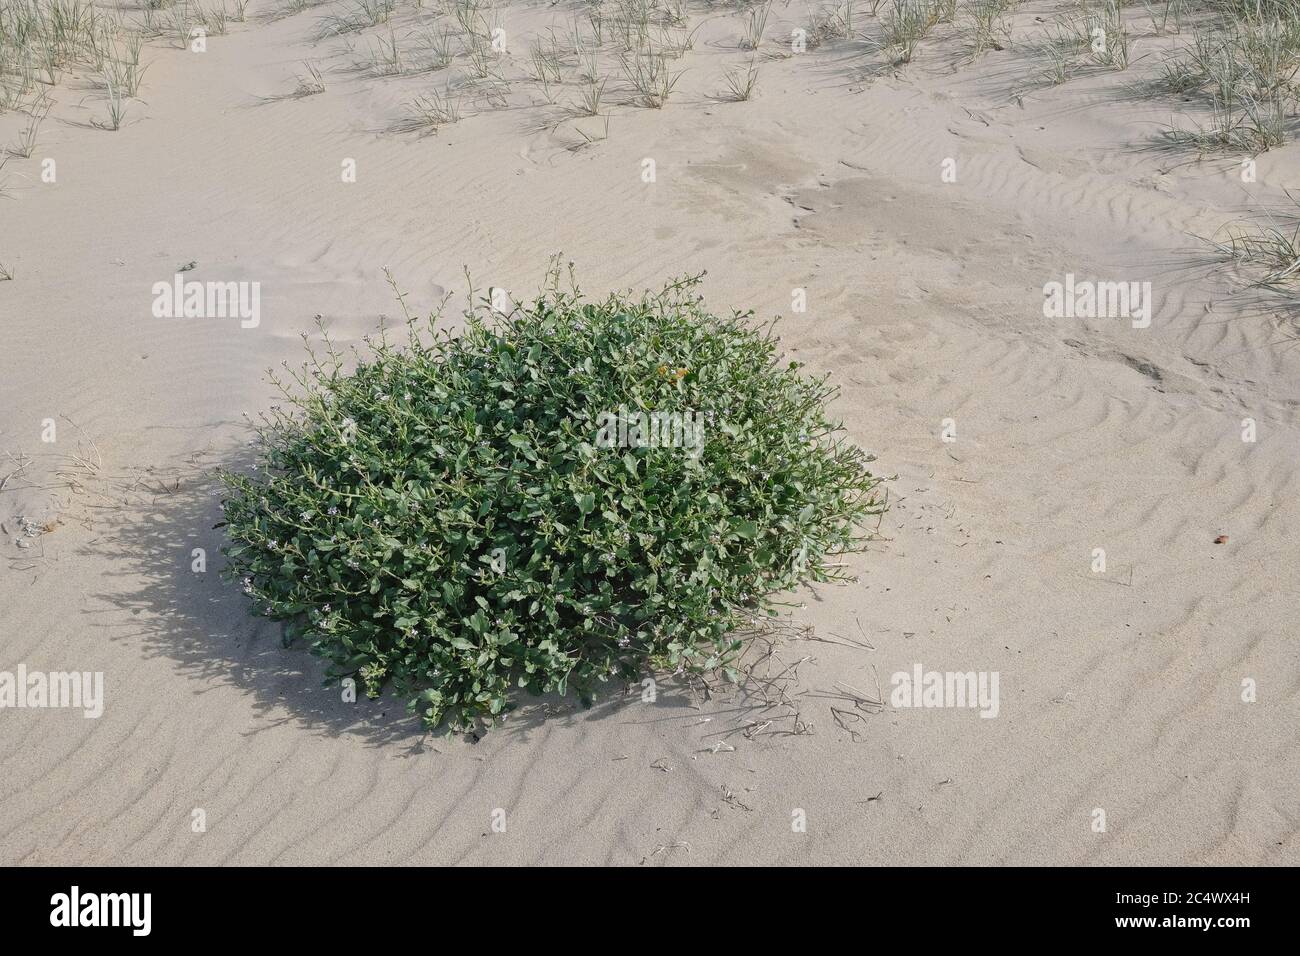 Looking down at a small shruby plant growing in the sand by the sea. Sparse grasses growing in the distance. Stock Photo